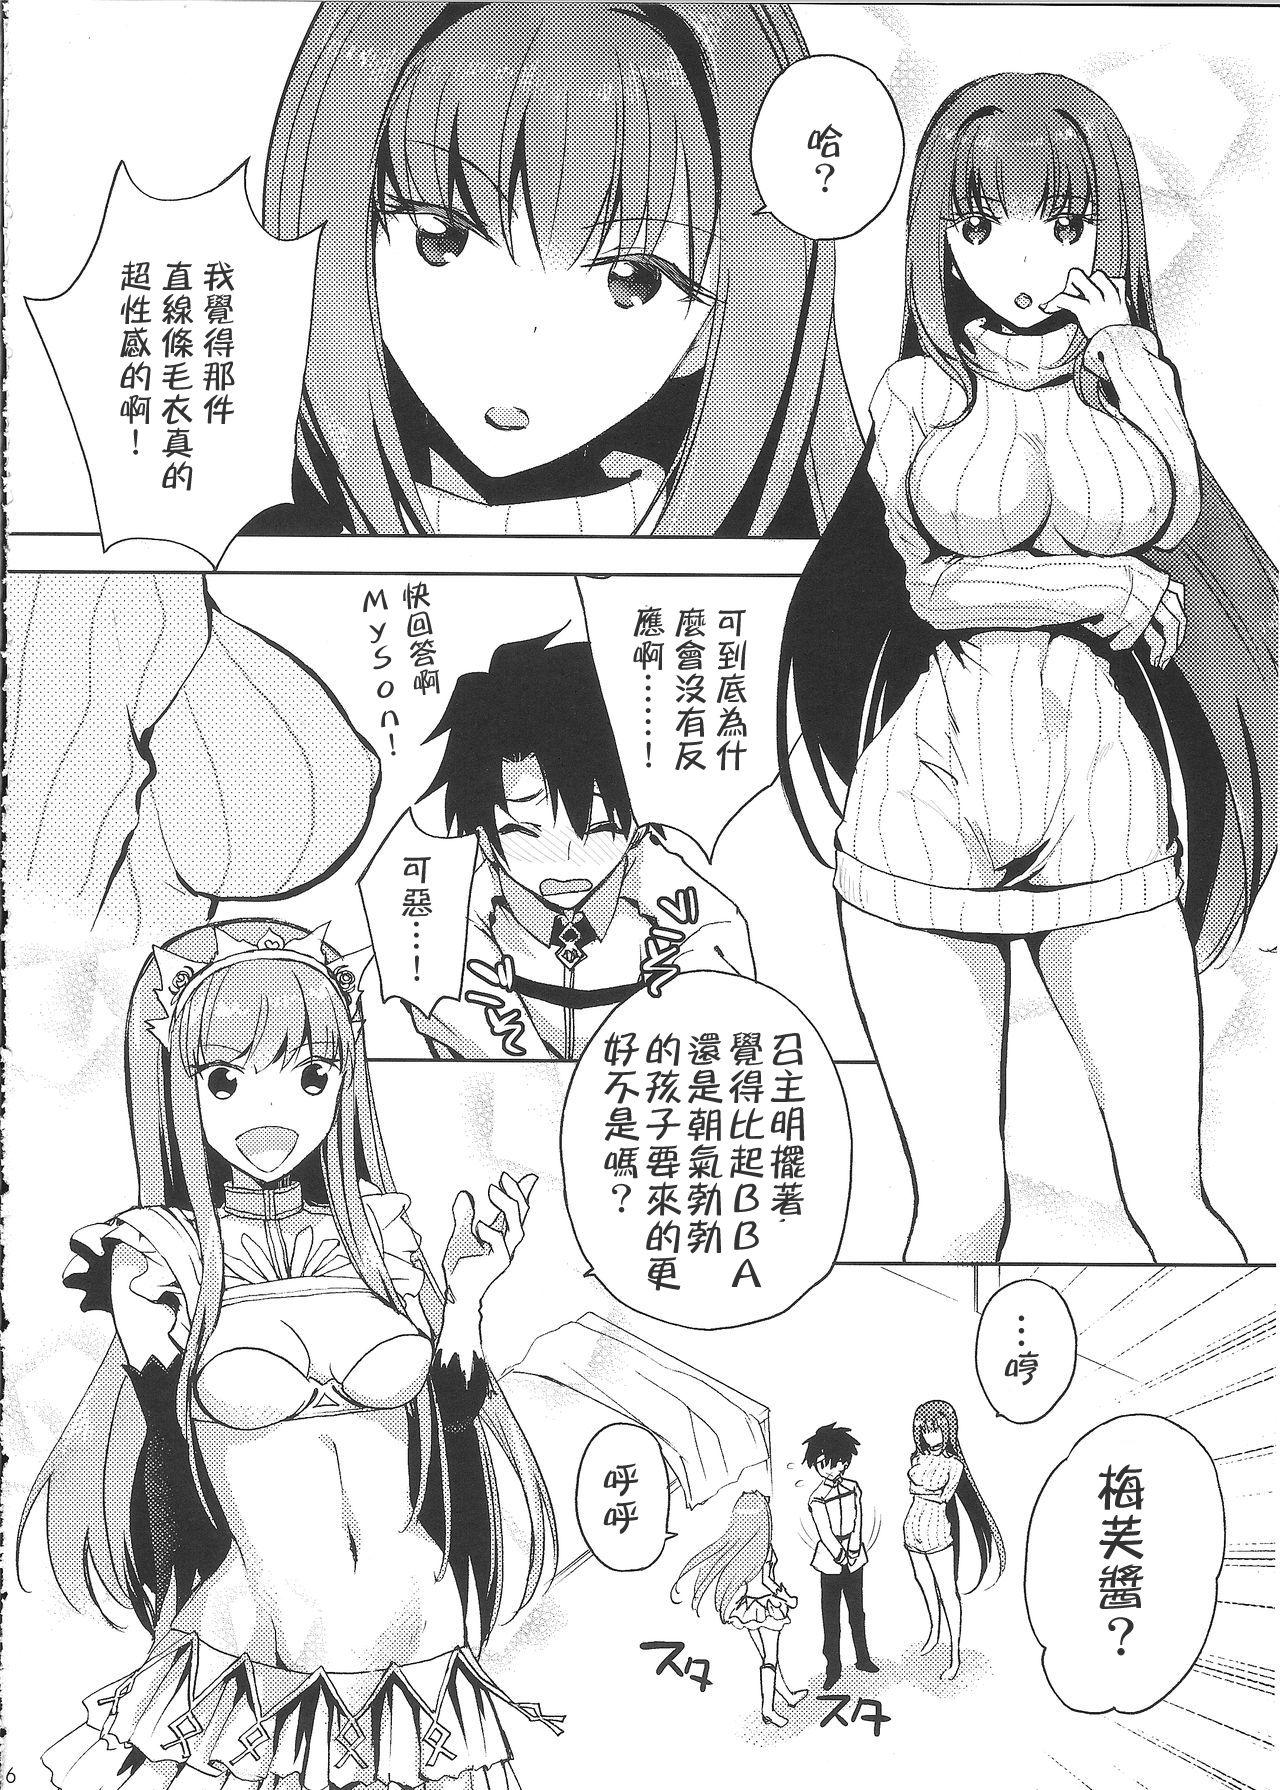 Erotic BLACK EDITION 2 - Fate grand order Toying - Page 4